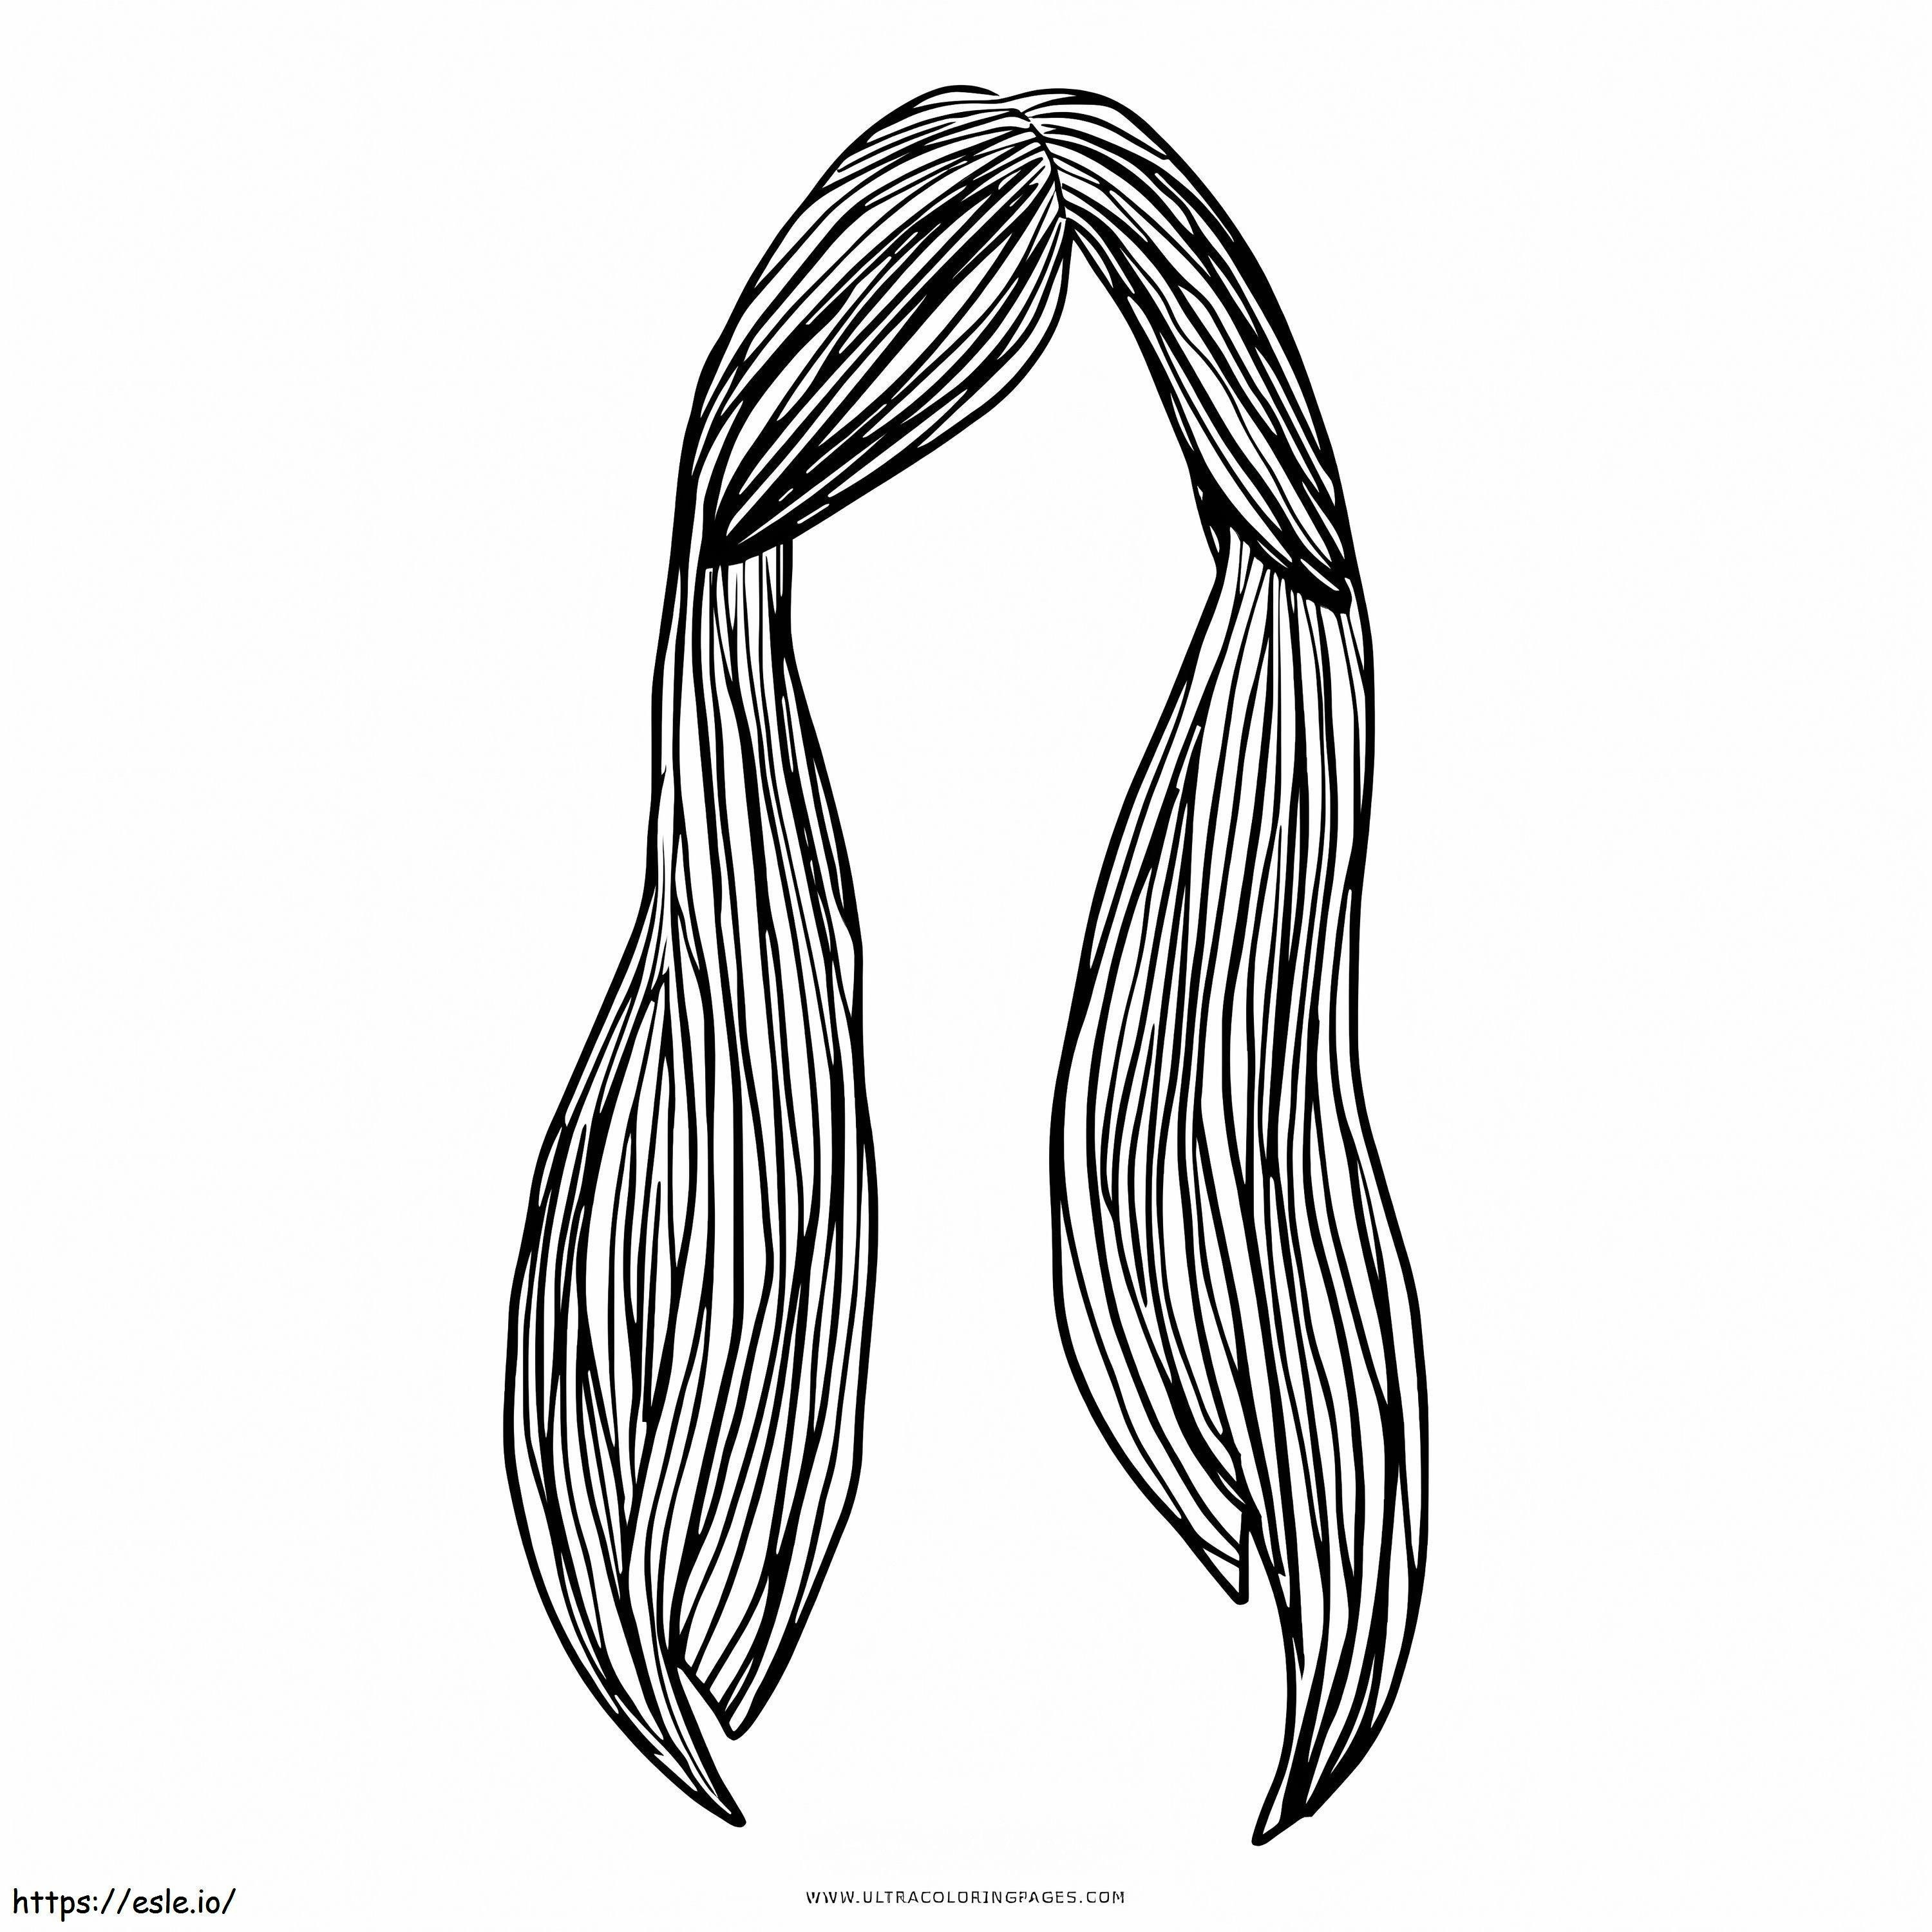 Long Hair 4 coloring page